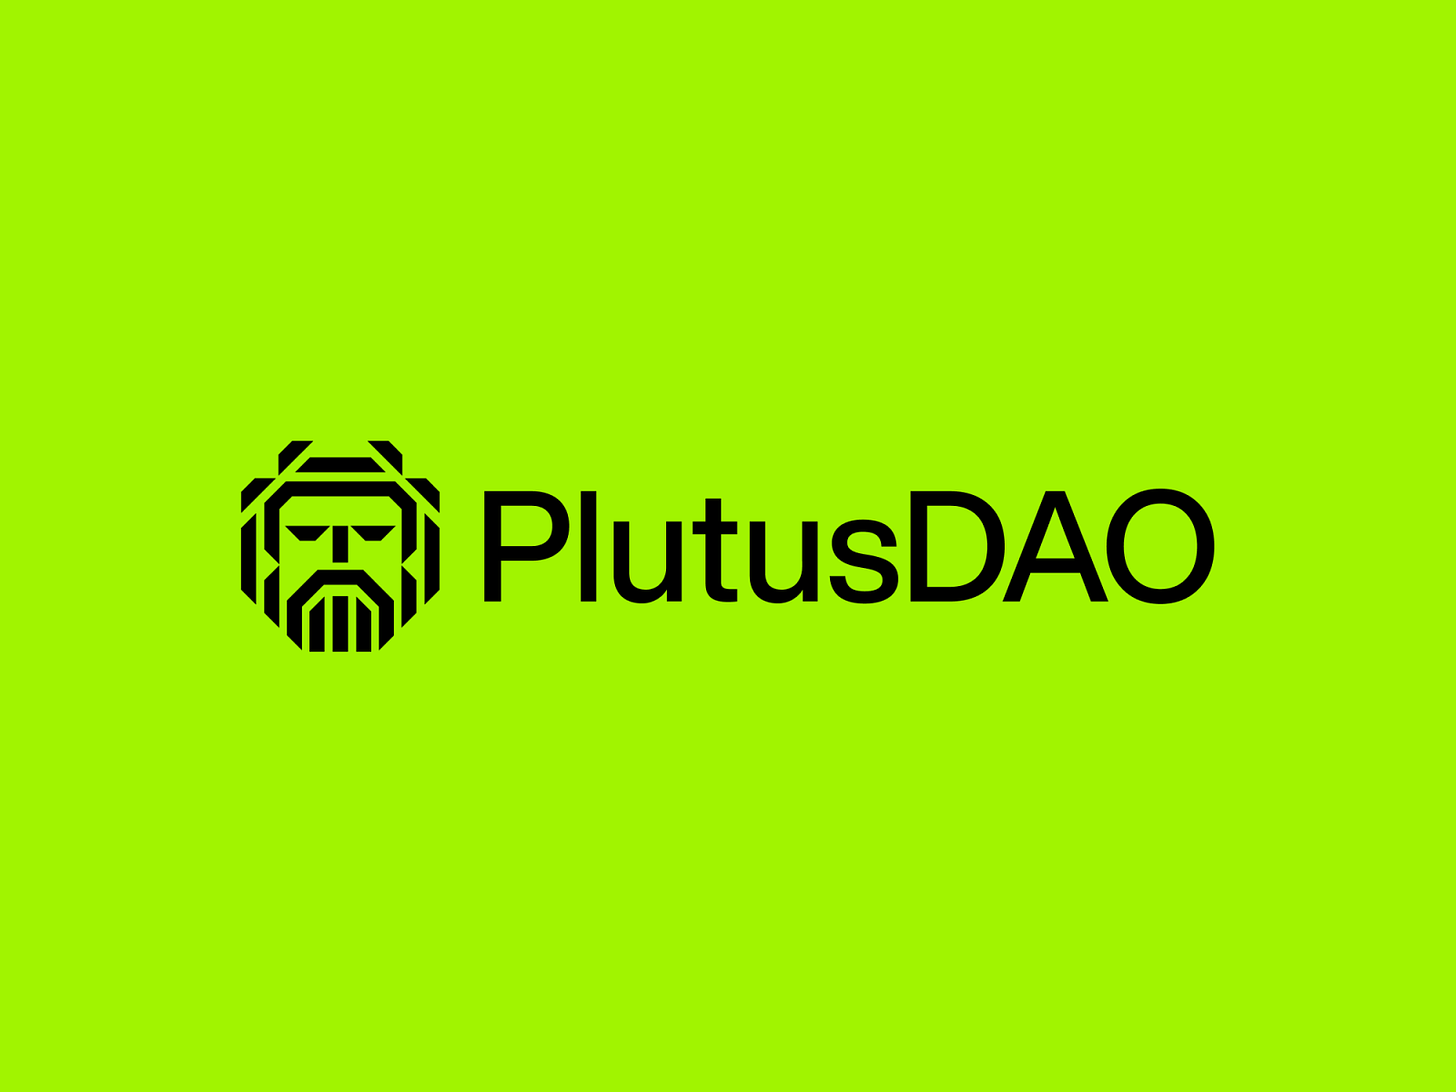 PlutusDAO Logo and Brand Identity Design by Second Eight on Dribbble